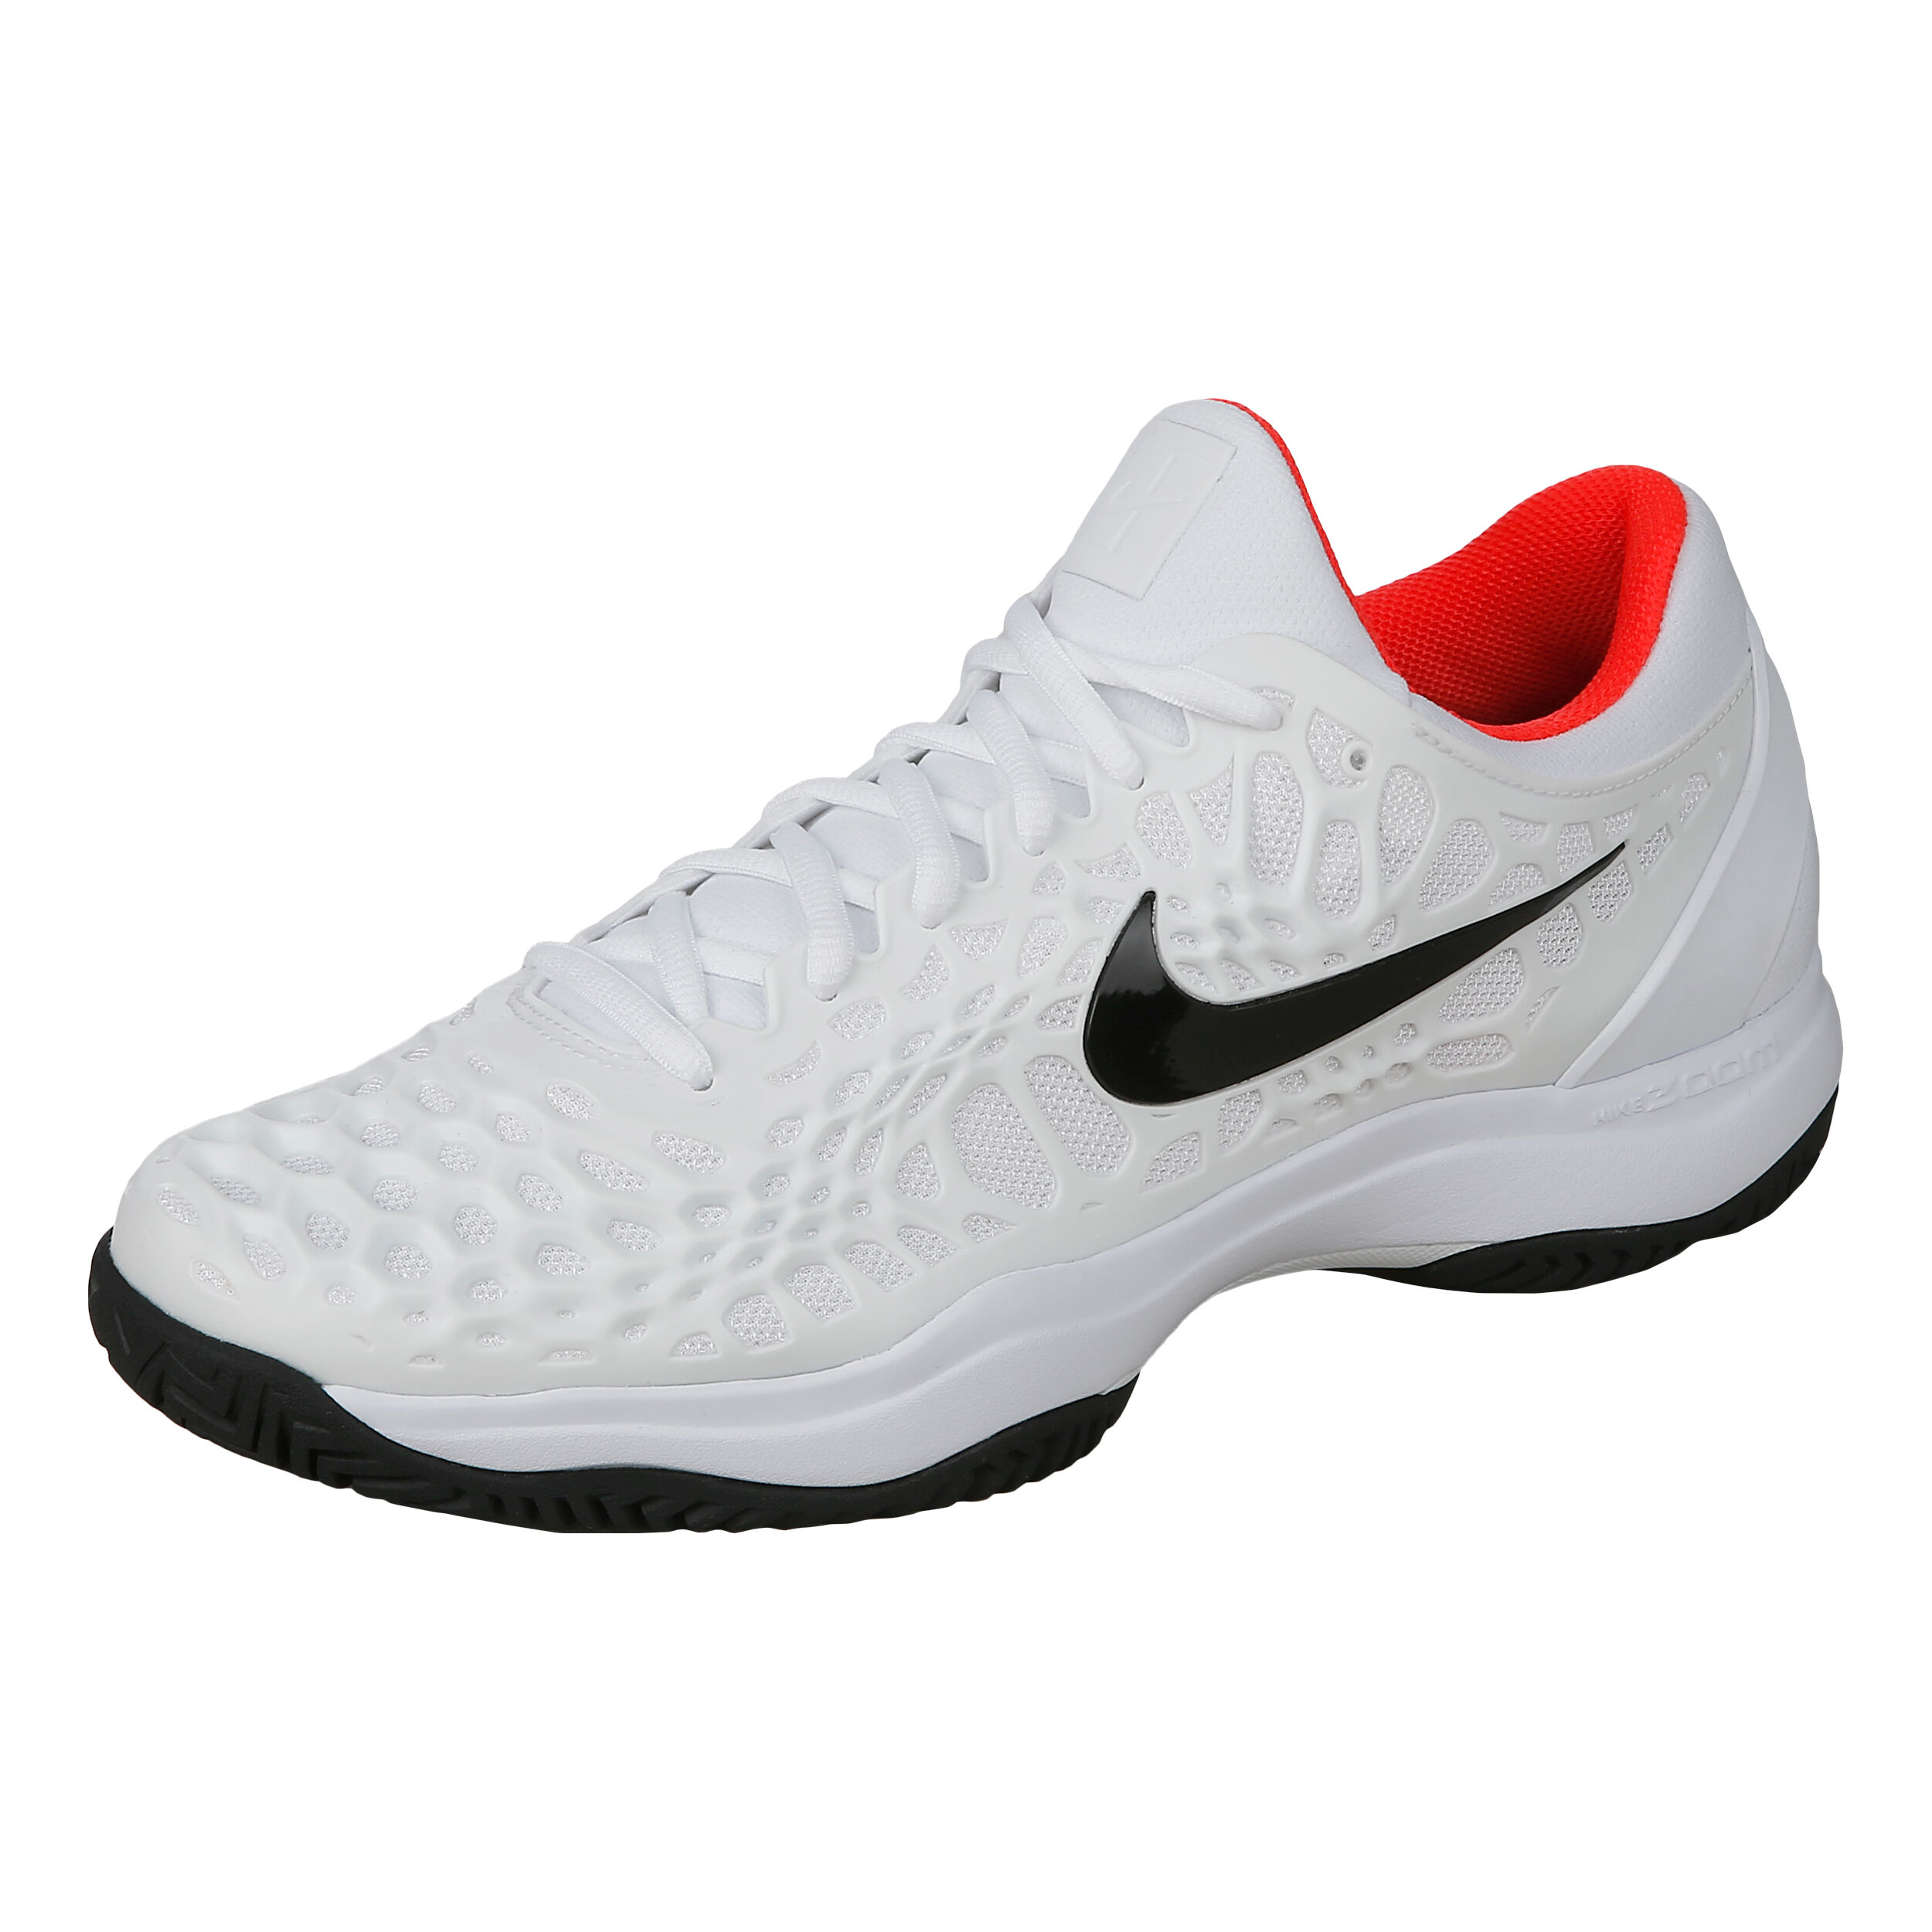 nike zoom 3 cage